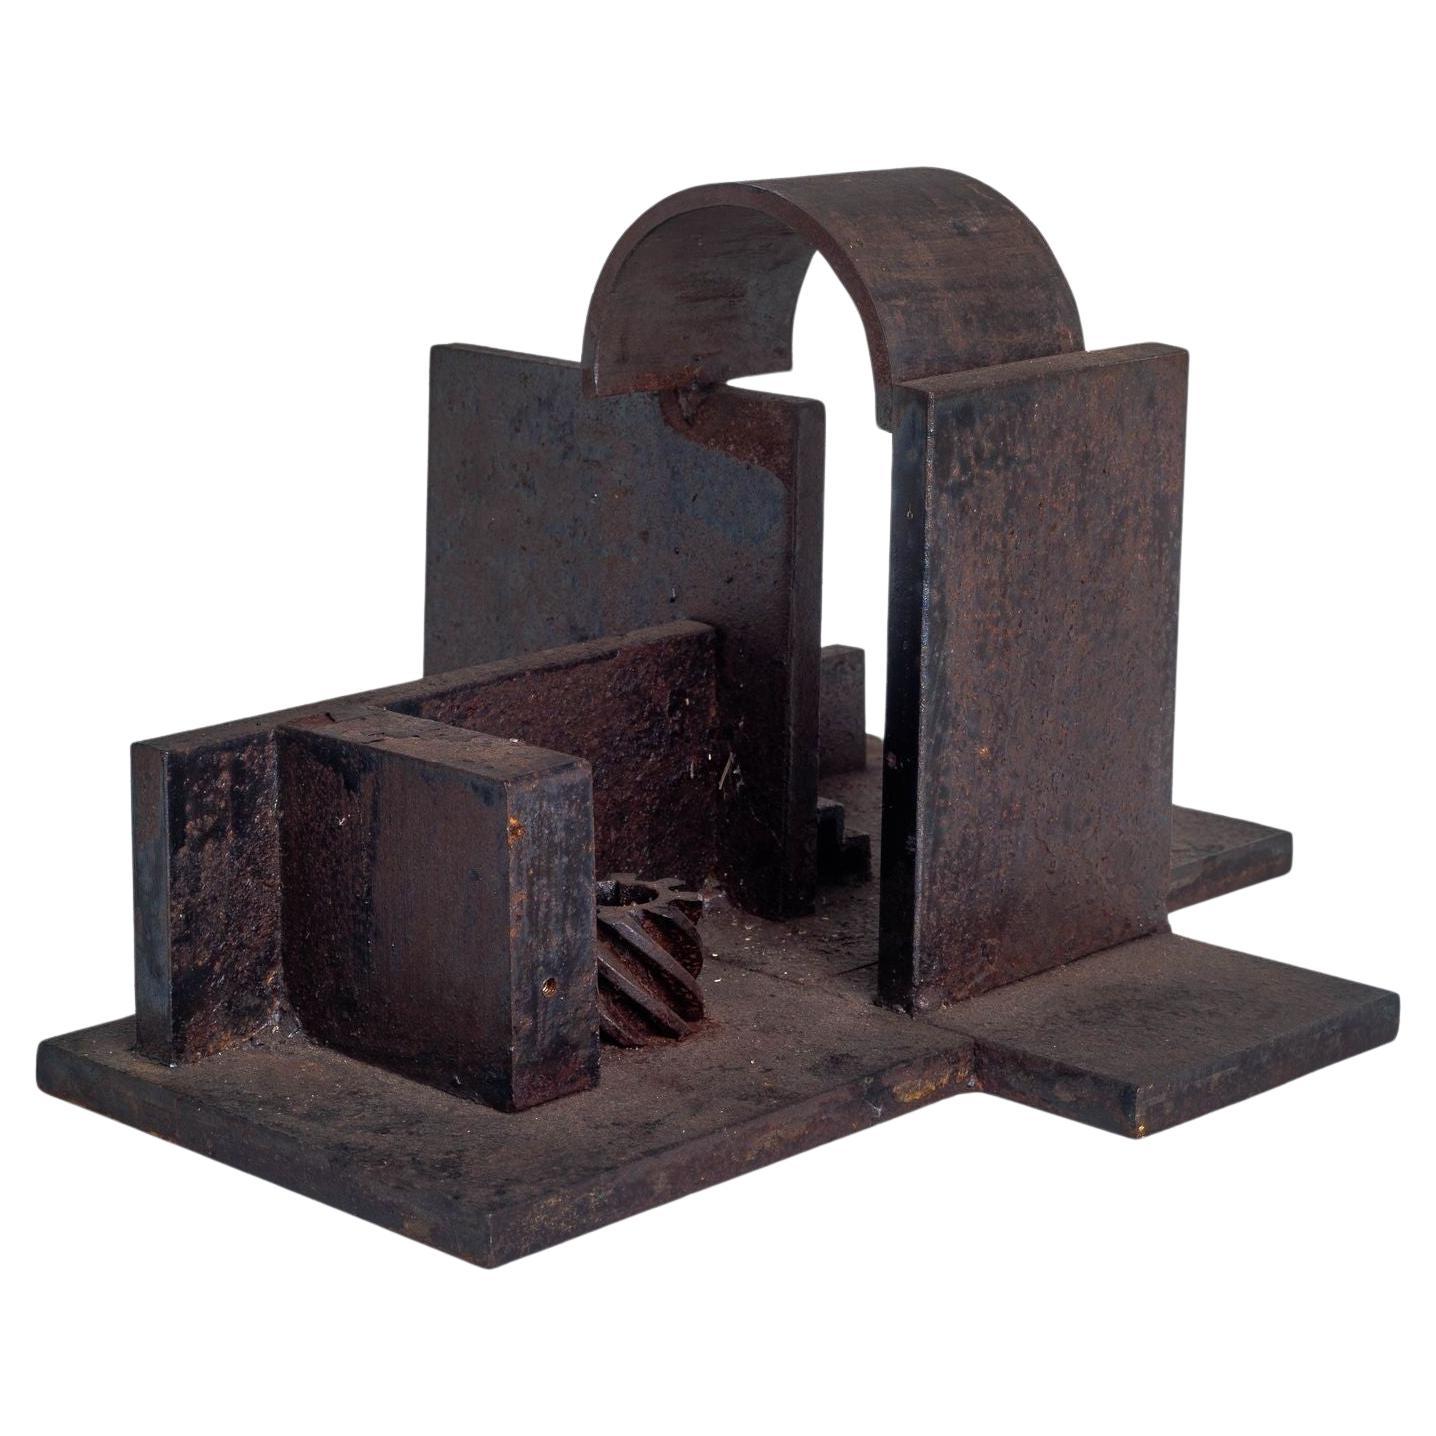 Tony Rosenthal Welded Steel Architectural Sculpture For Sale